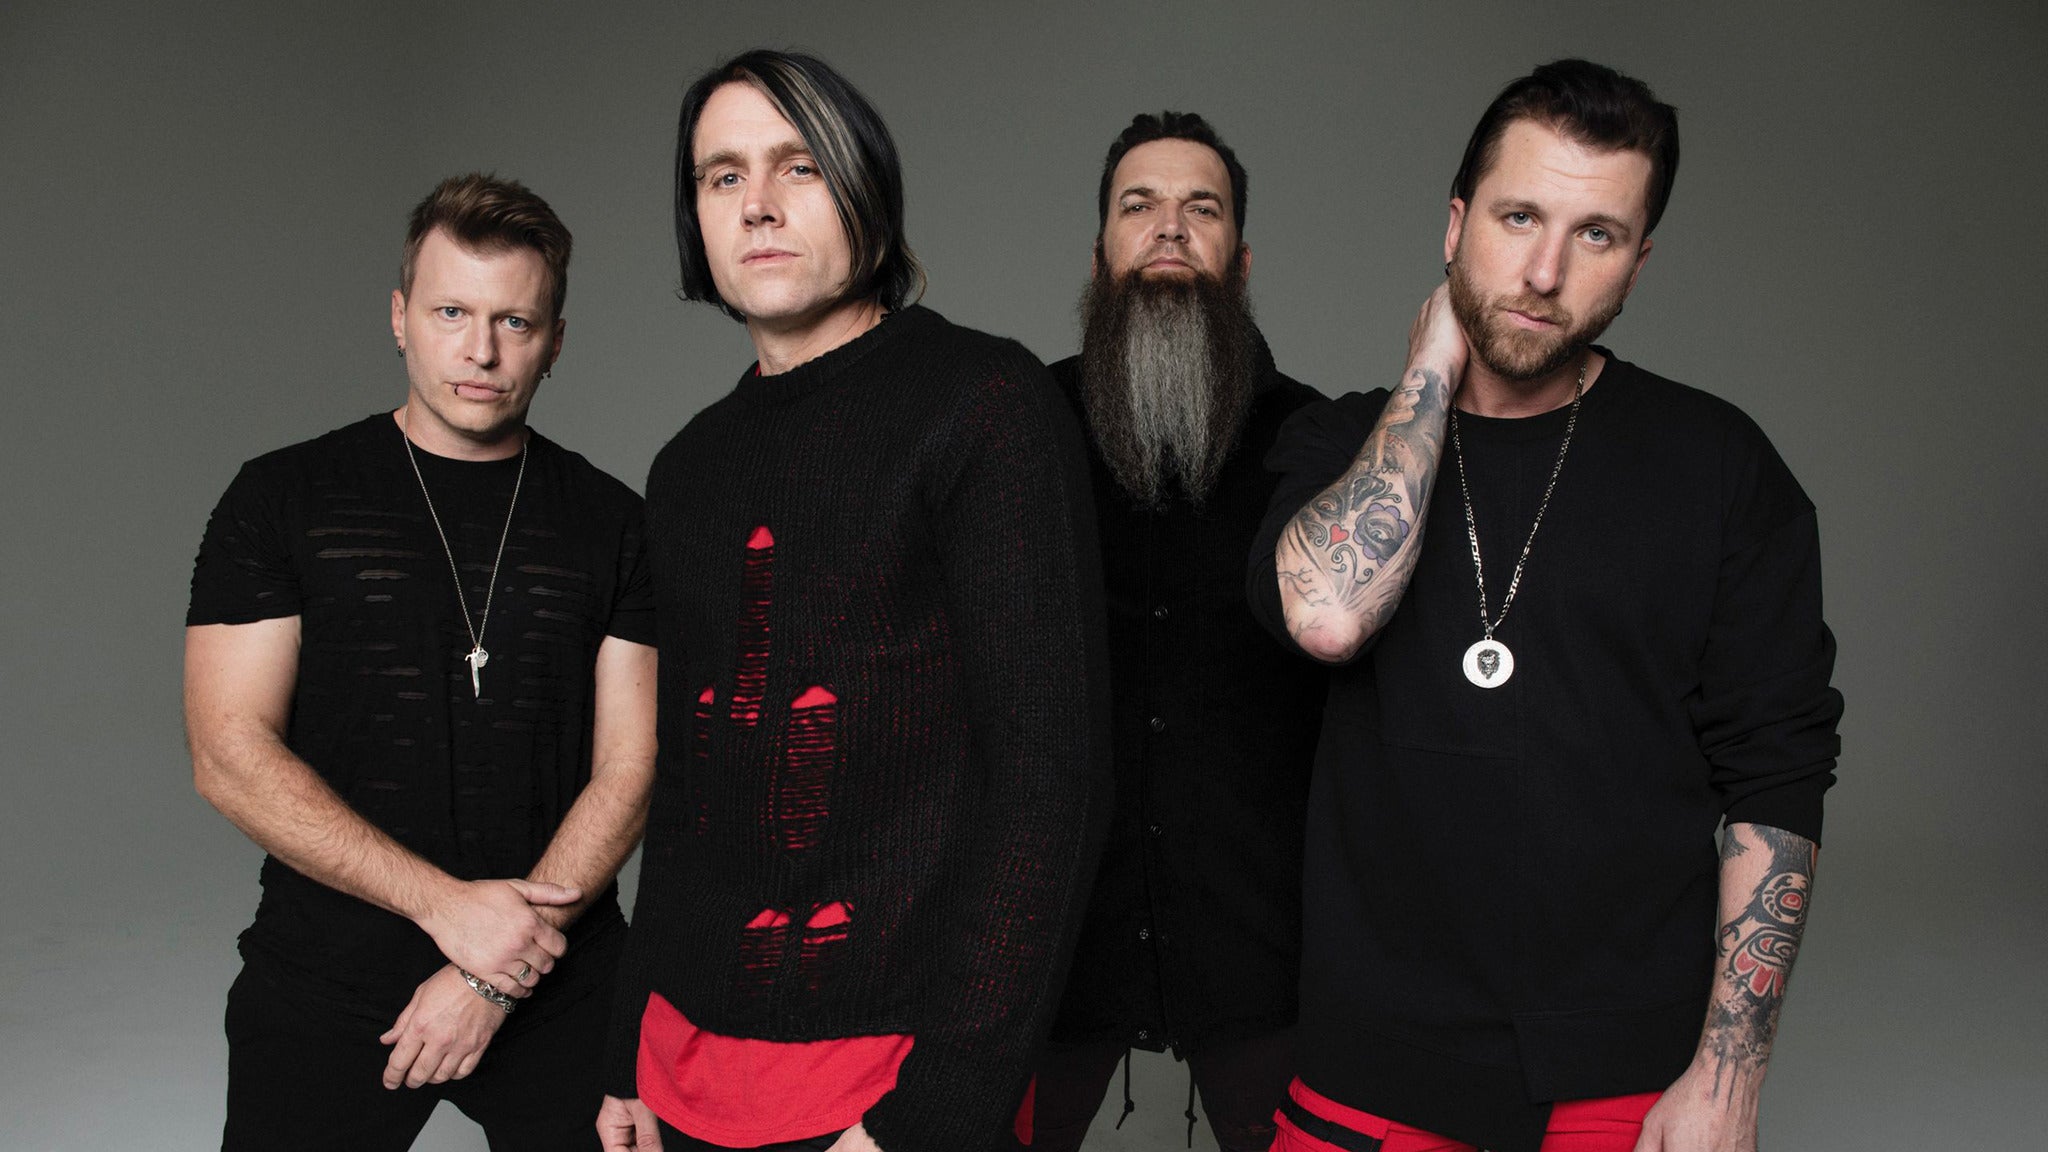 97.1 The Eagle Presents Three Days Grace: Explosions Tour